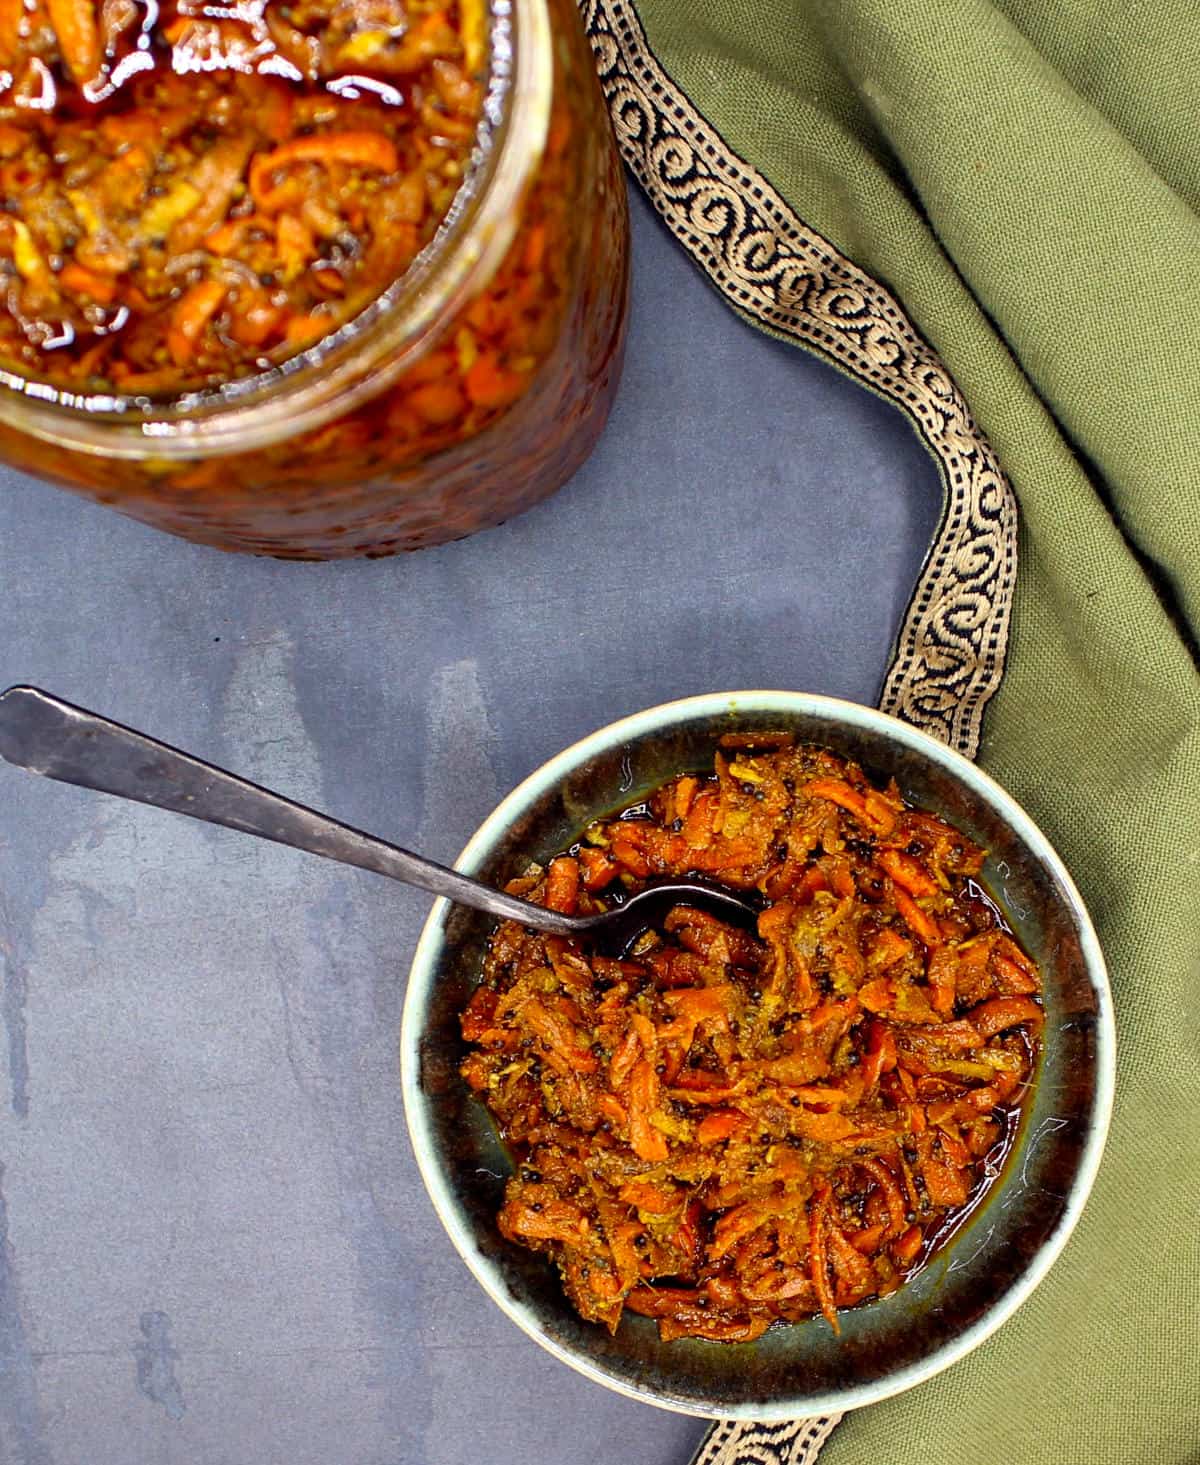 A bowl of gajar ka achar with a jar of the pickled carrots in background.